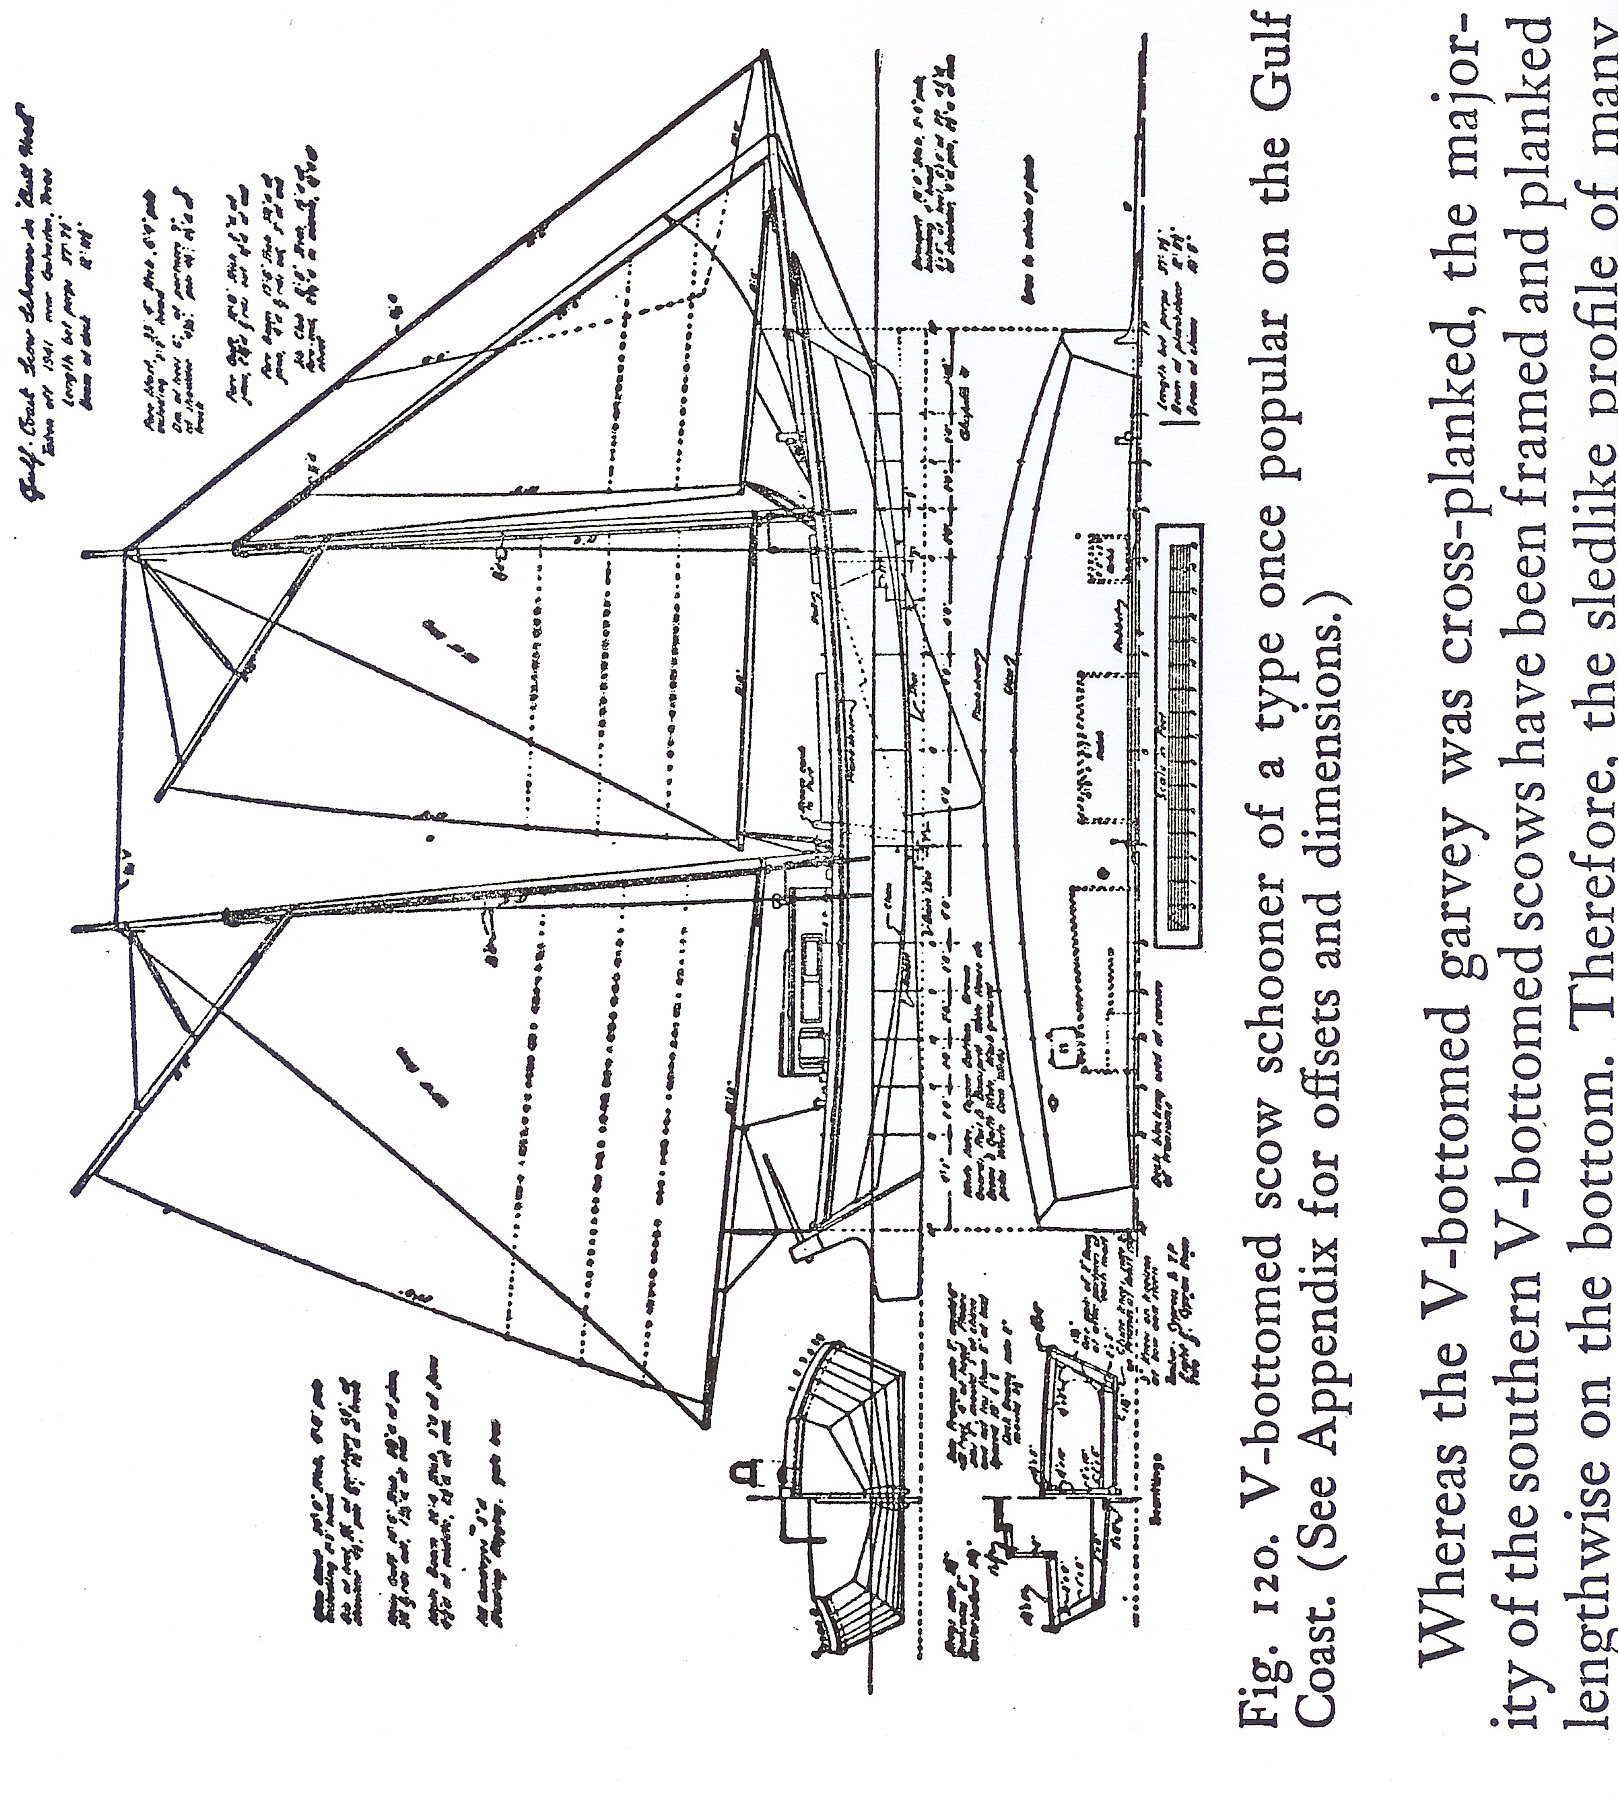 Hartley dinghys and small craft – Boat Plans, Build Your Own Boat